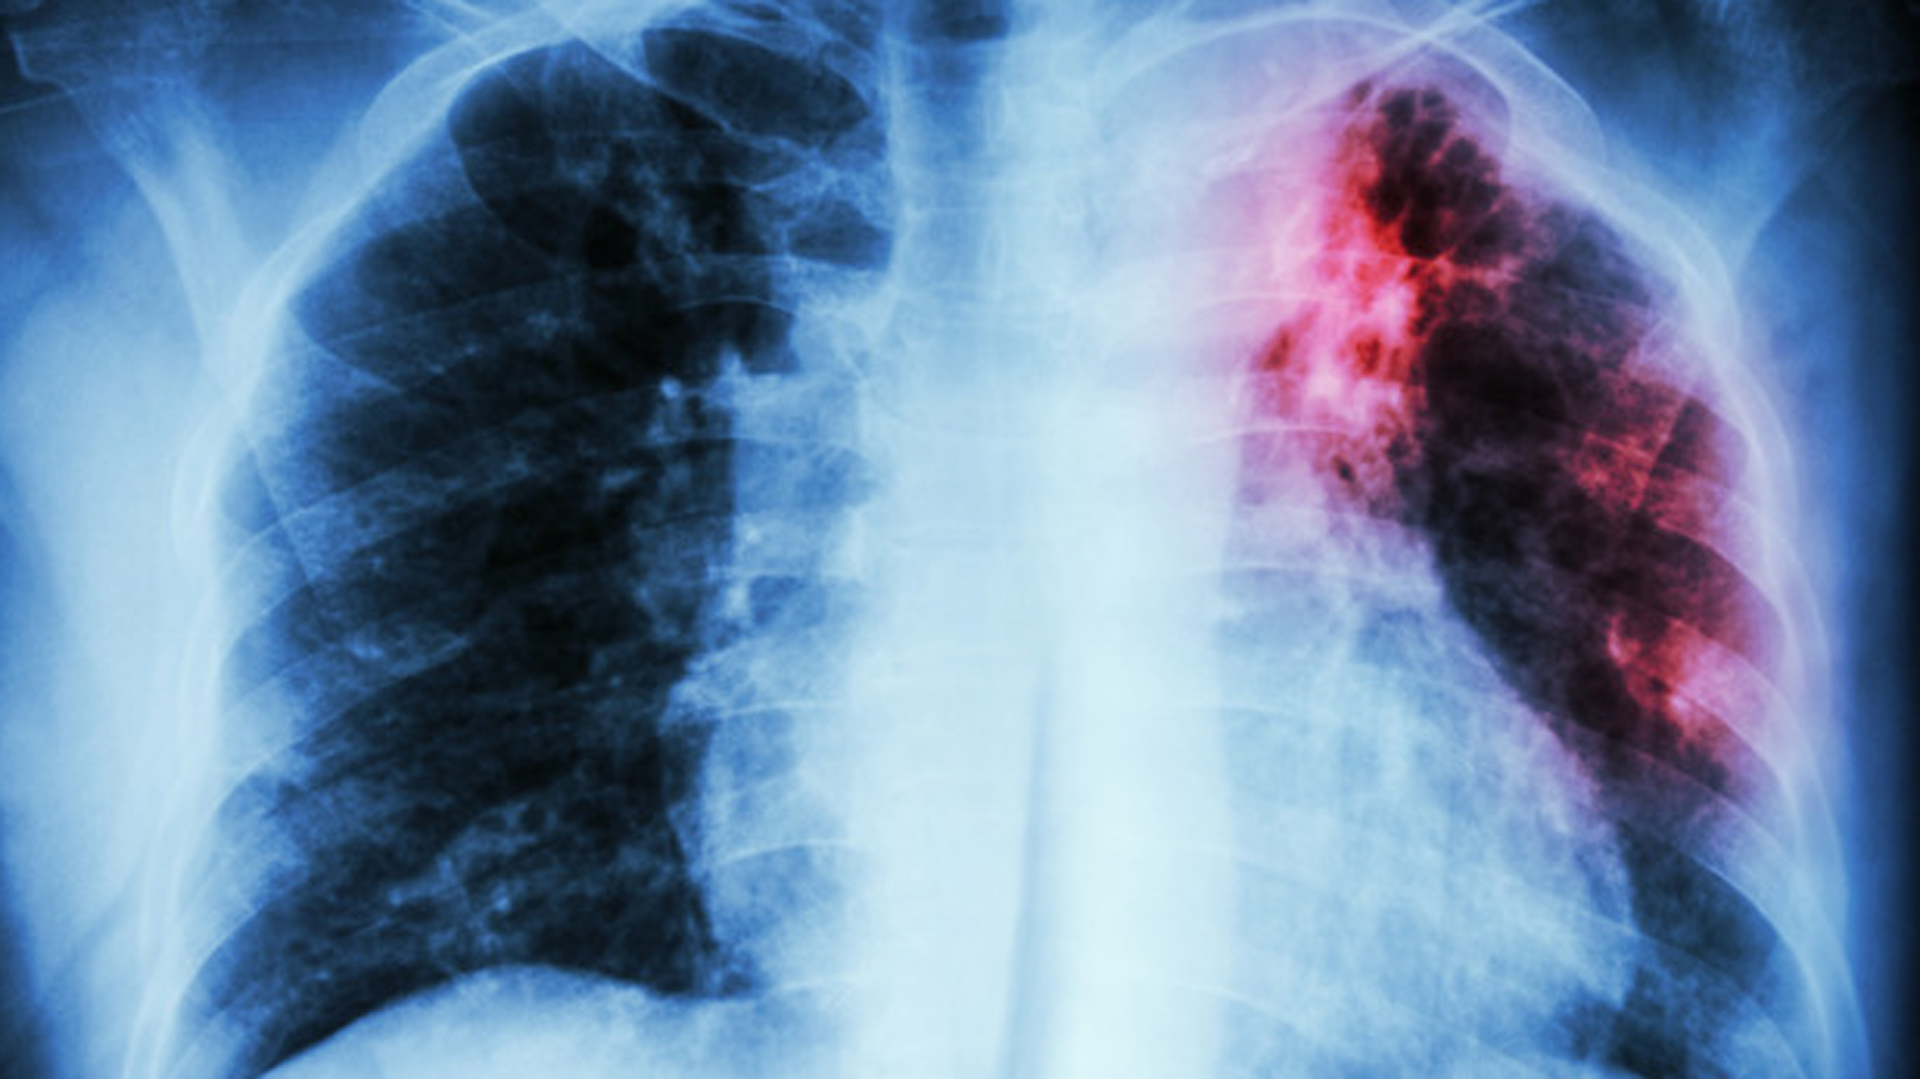 Ipf Causes Scarring Of The Lung Tissue, Making It Thick And Hard/(Istock)